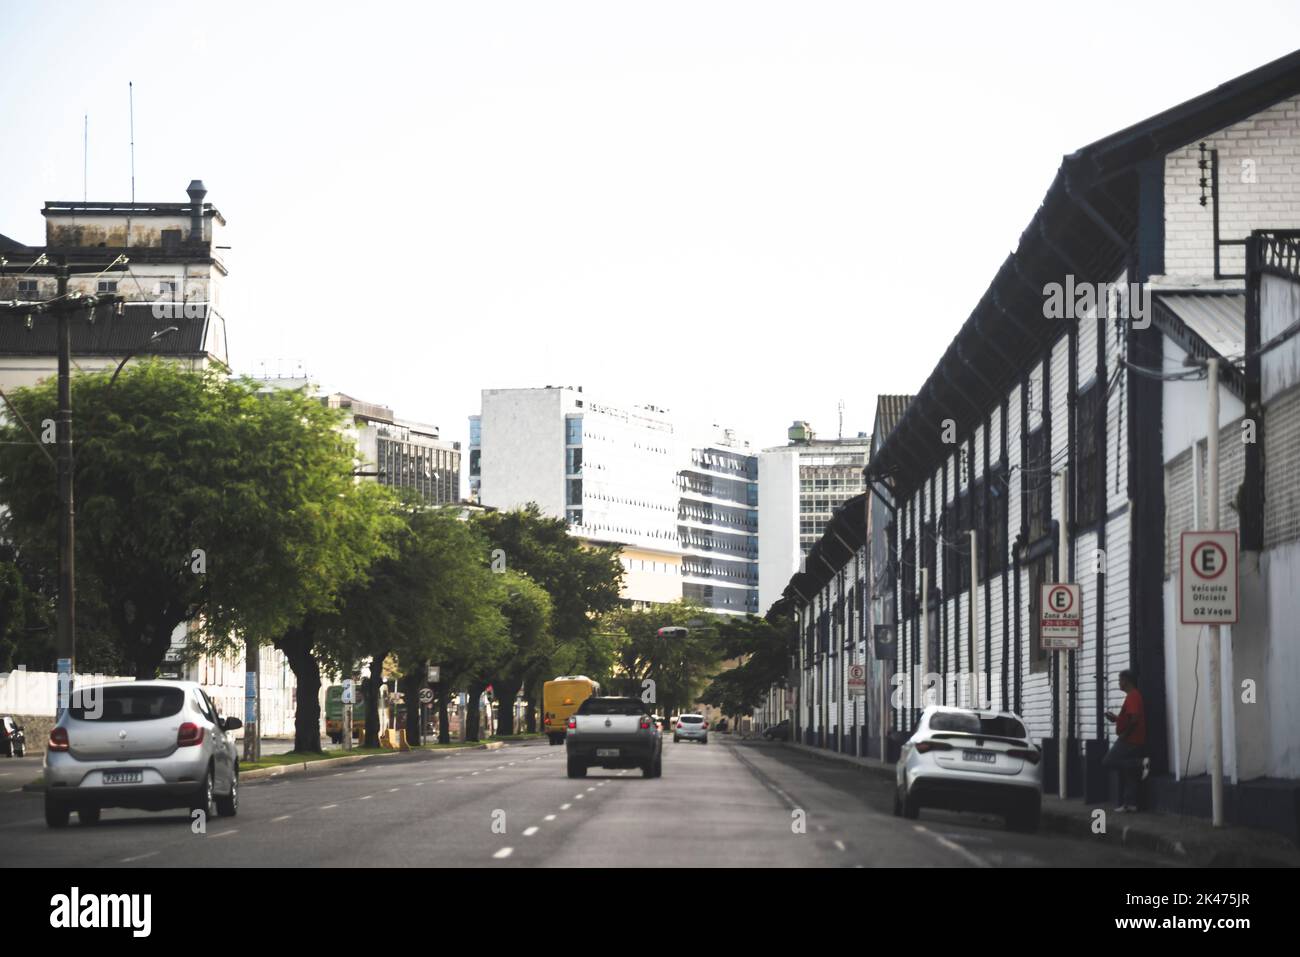 Busy street with car traffic in the Comercio district. City of Salvador, Brazil. Stock Photo